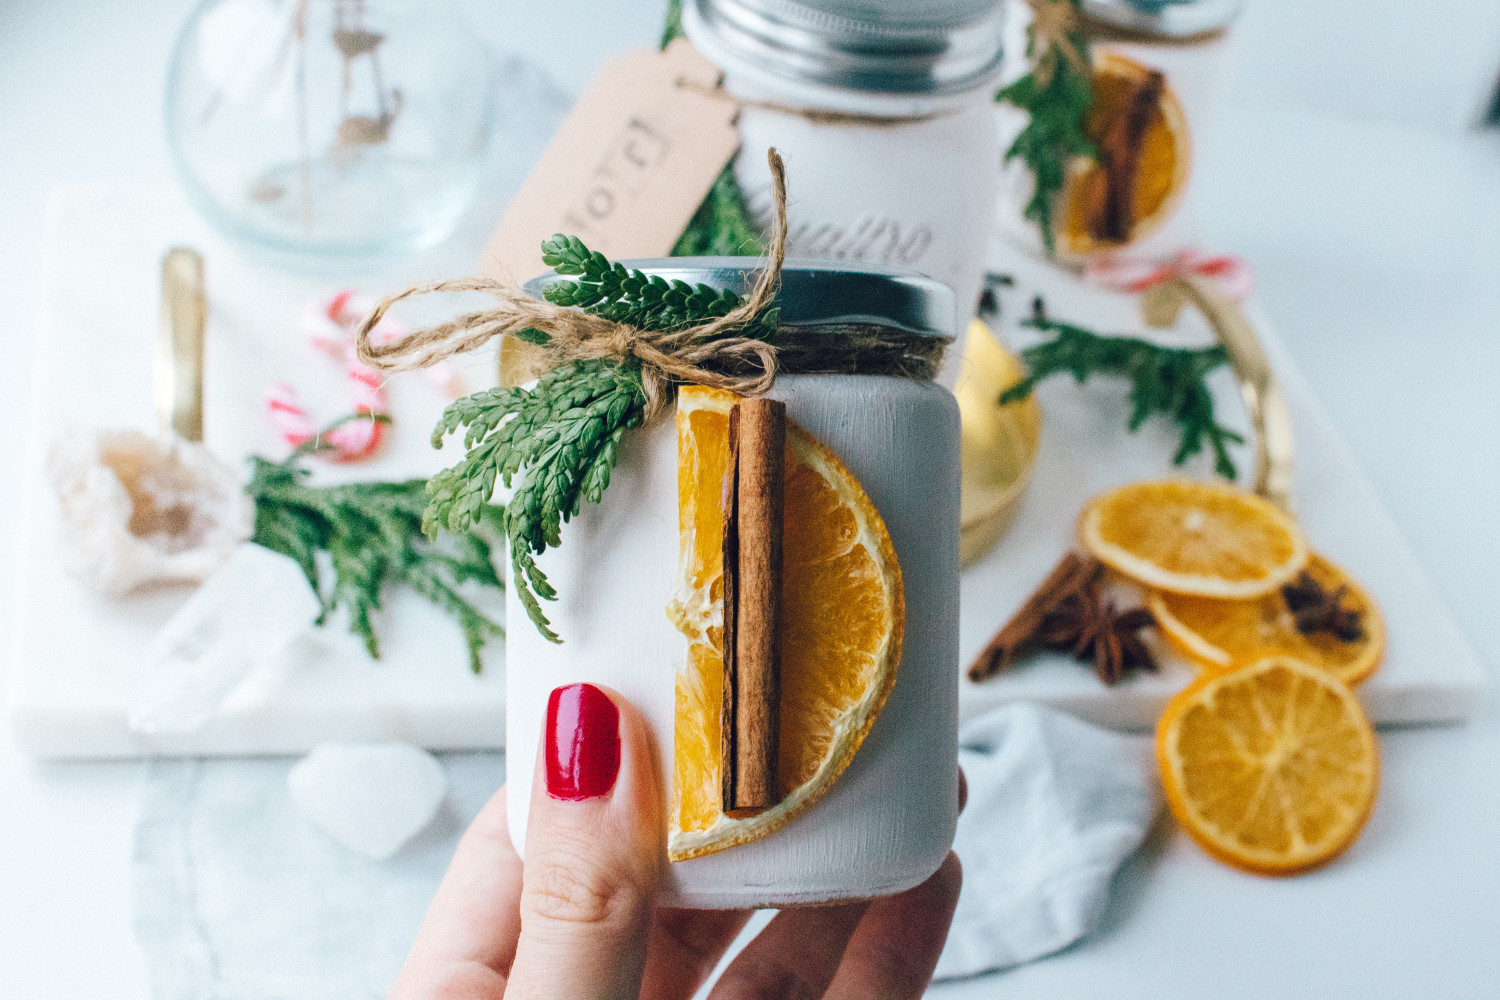 DIY // Handmade scented beeswax candles - the perfect homemade christmas present (w. video)